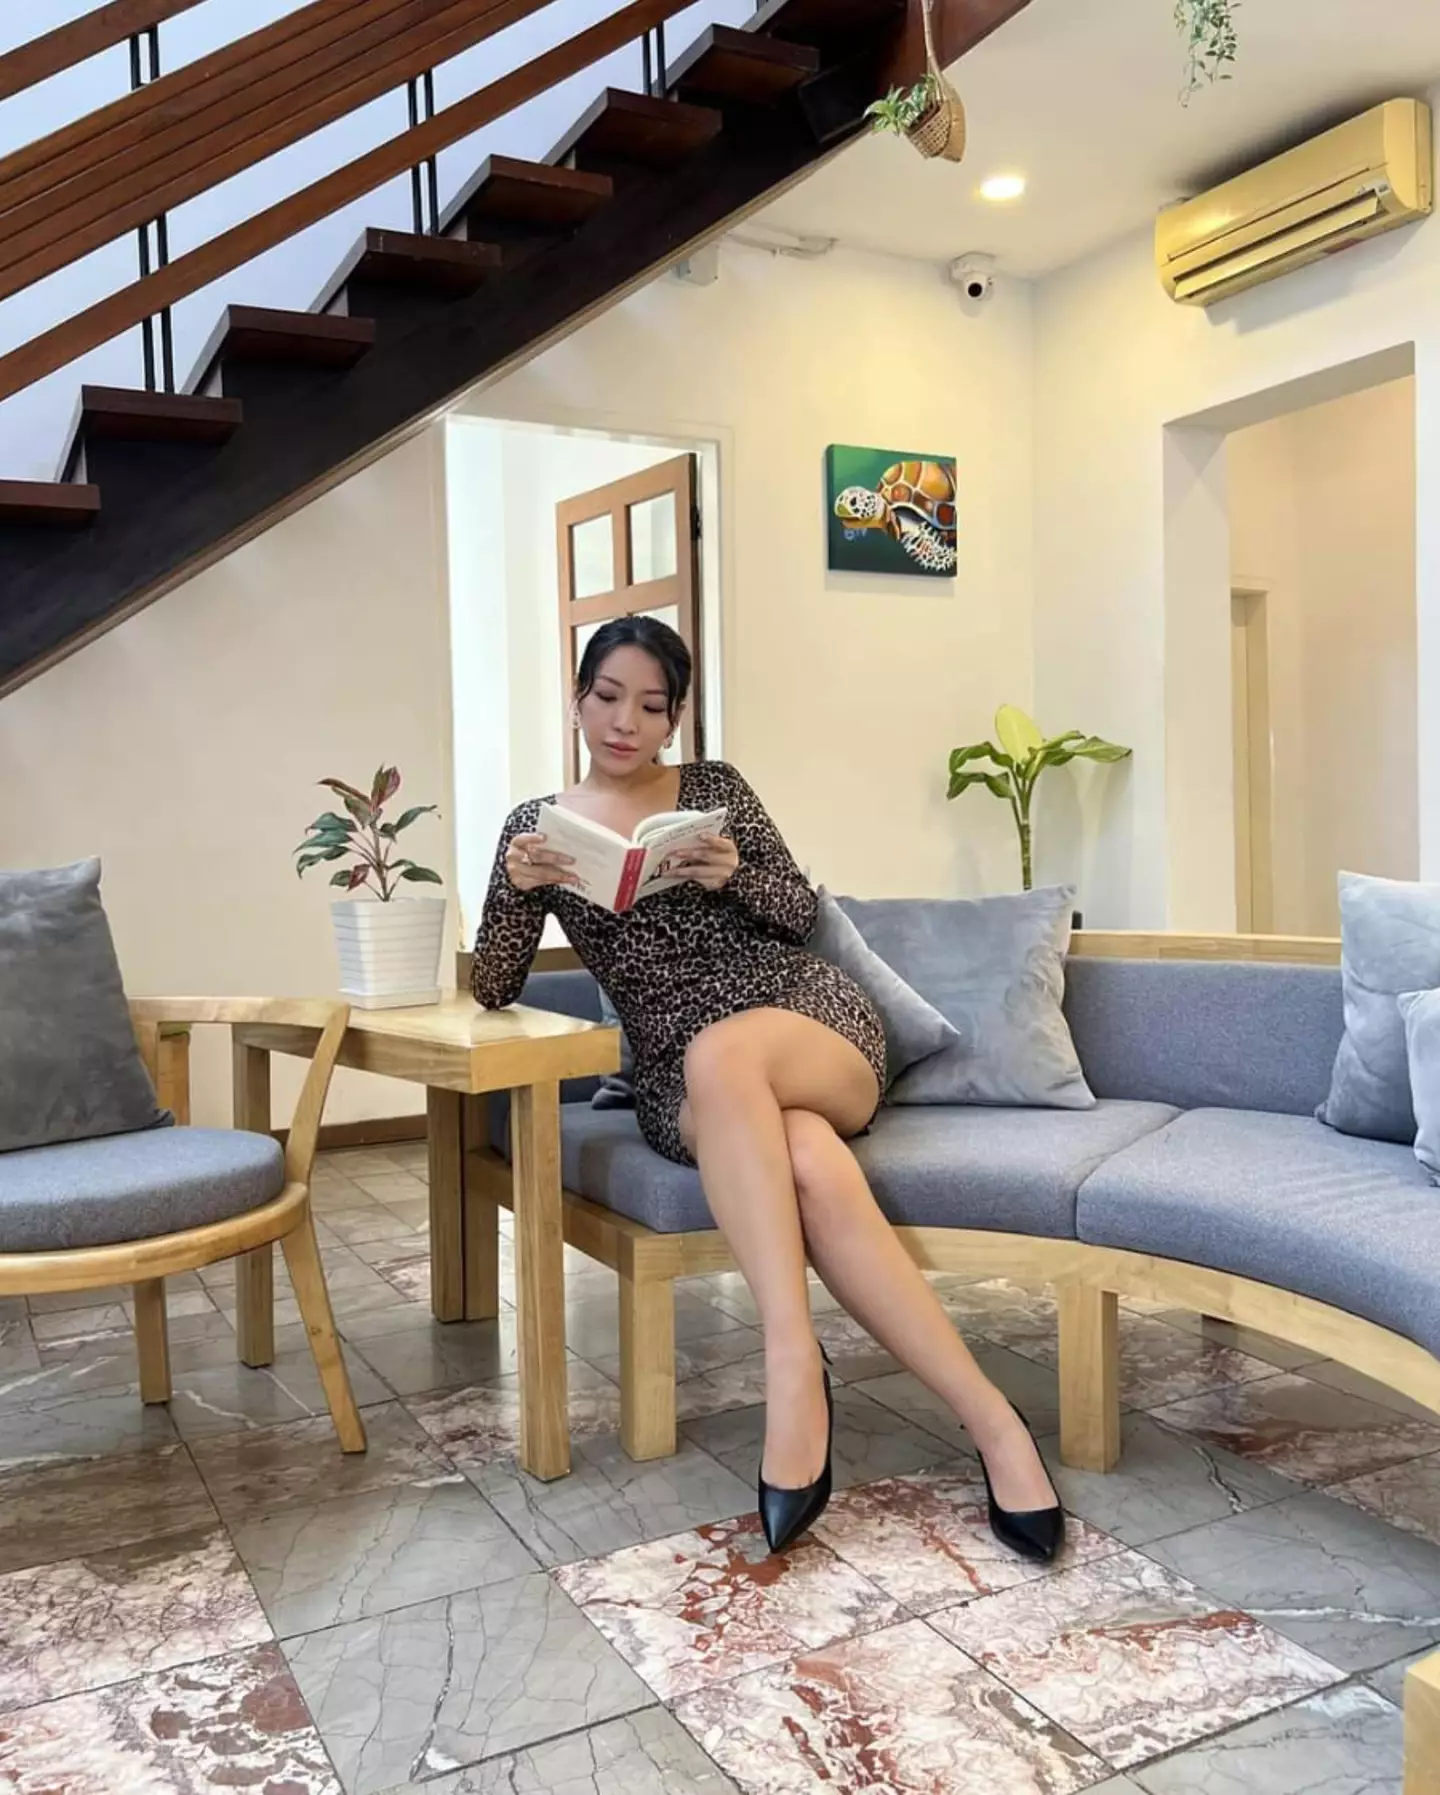 A military court convicted model Nang Mwe San for ‘harming culture and dignity’ by distributing ‘sexually explicit’ videos and photos for money.